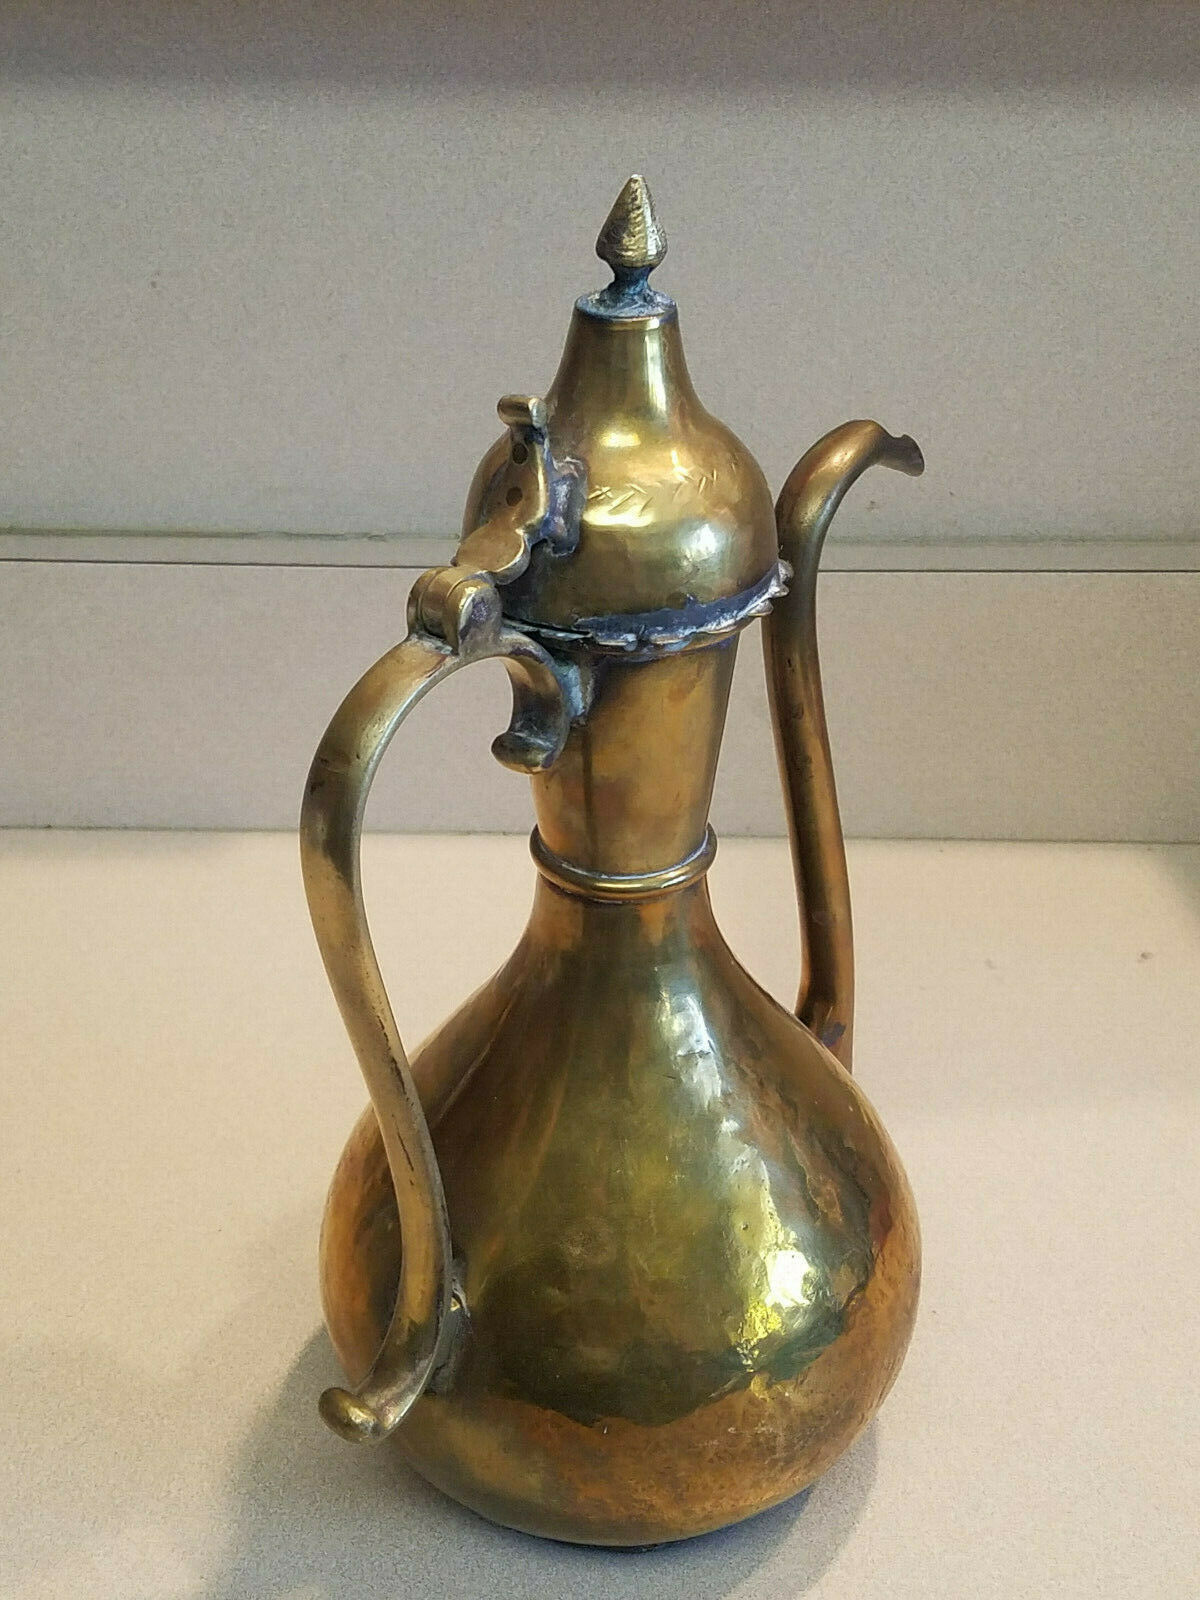 Brass Teapot Vintage from India - Brass Water Pitcher Engraved Floral  Design - Solid Brass Urn/Teapot Made in India